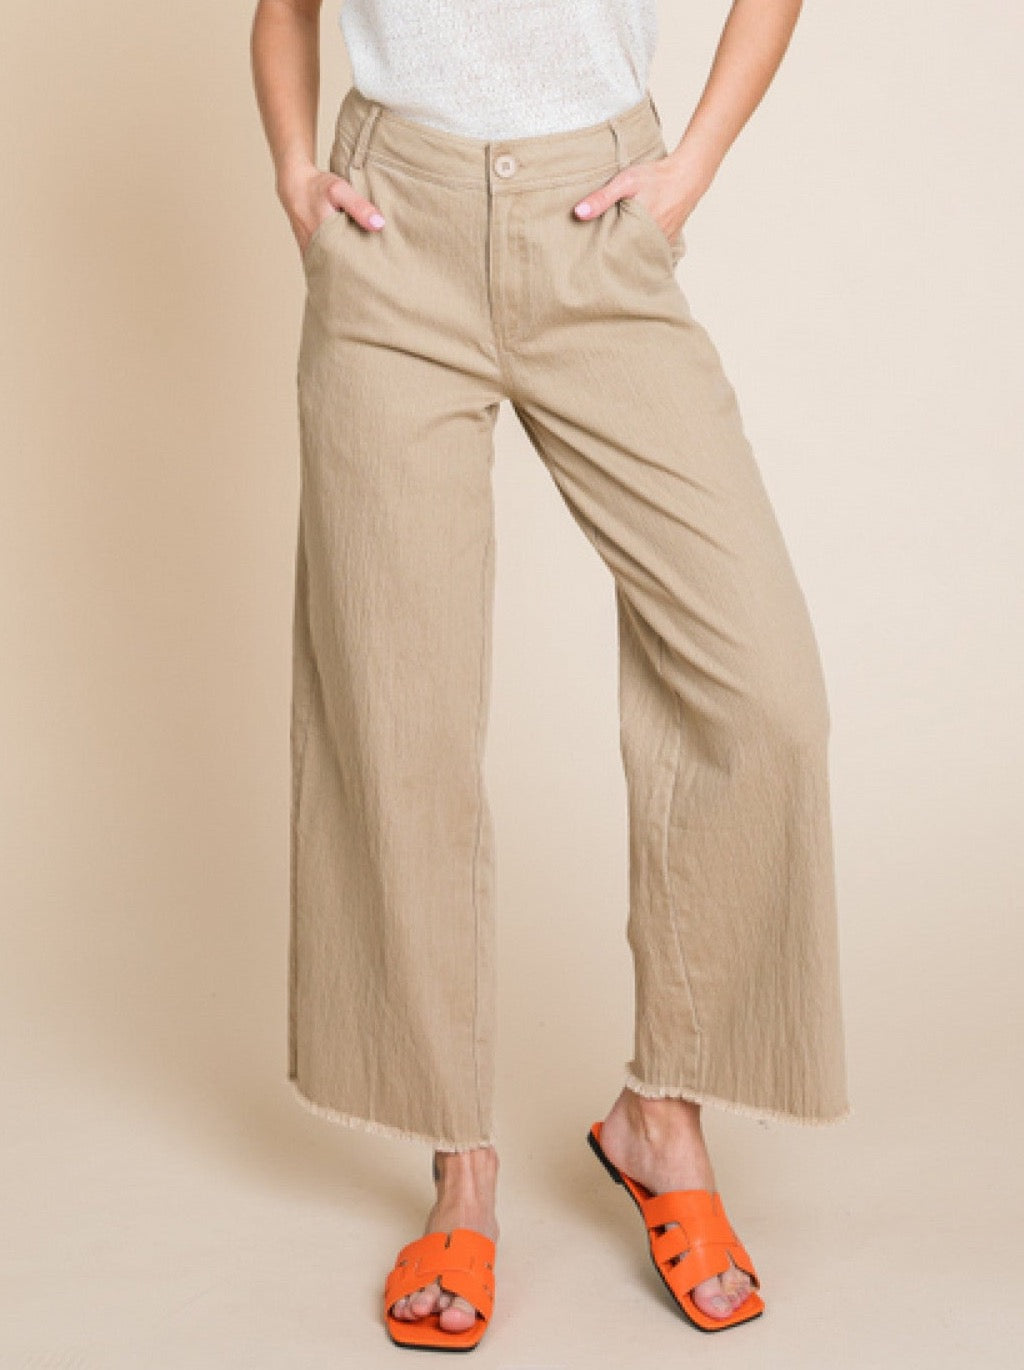 Swing Into Spring Pants